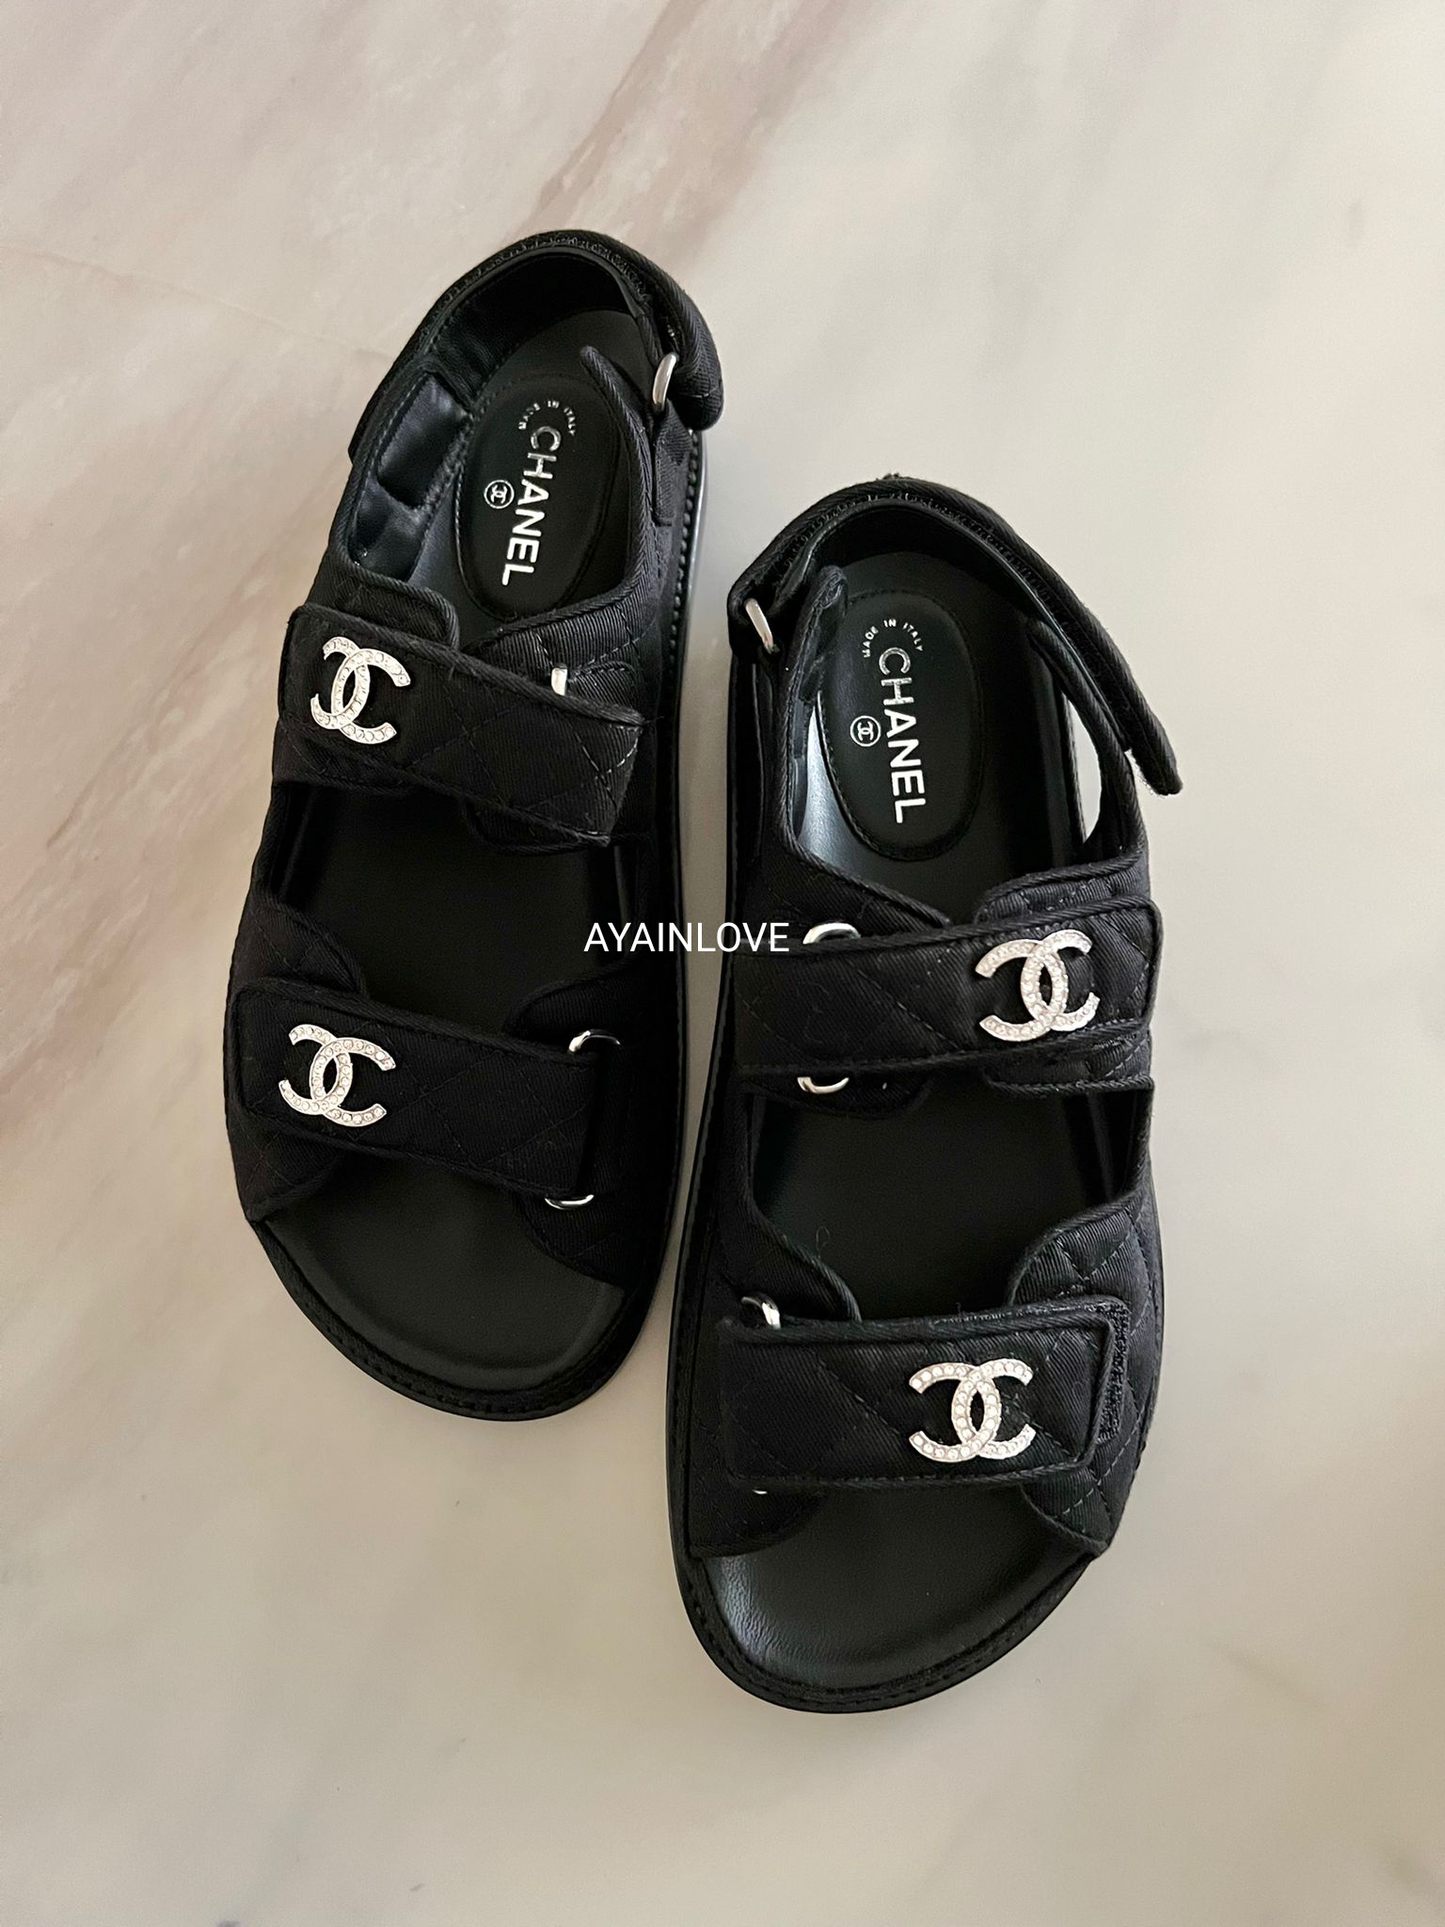 Chanel Sandals in Black